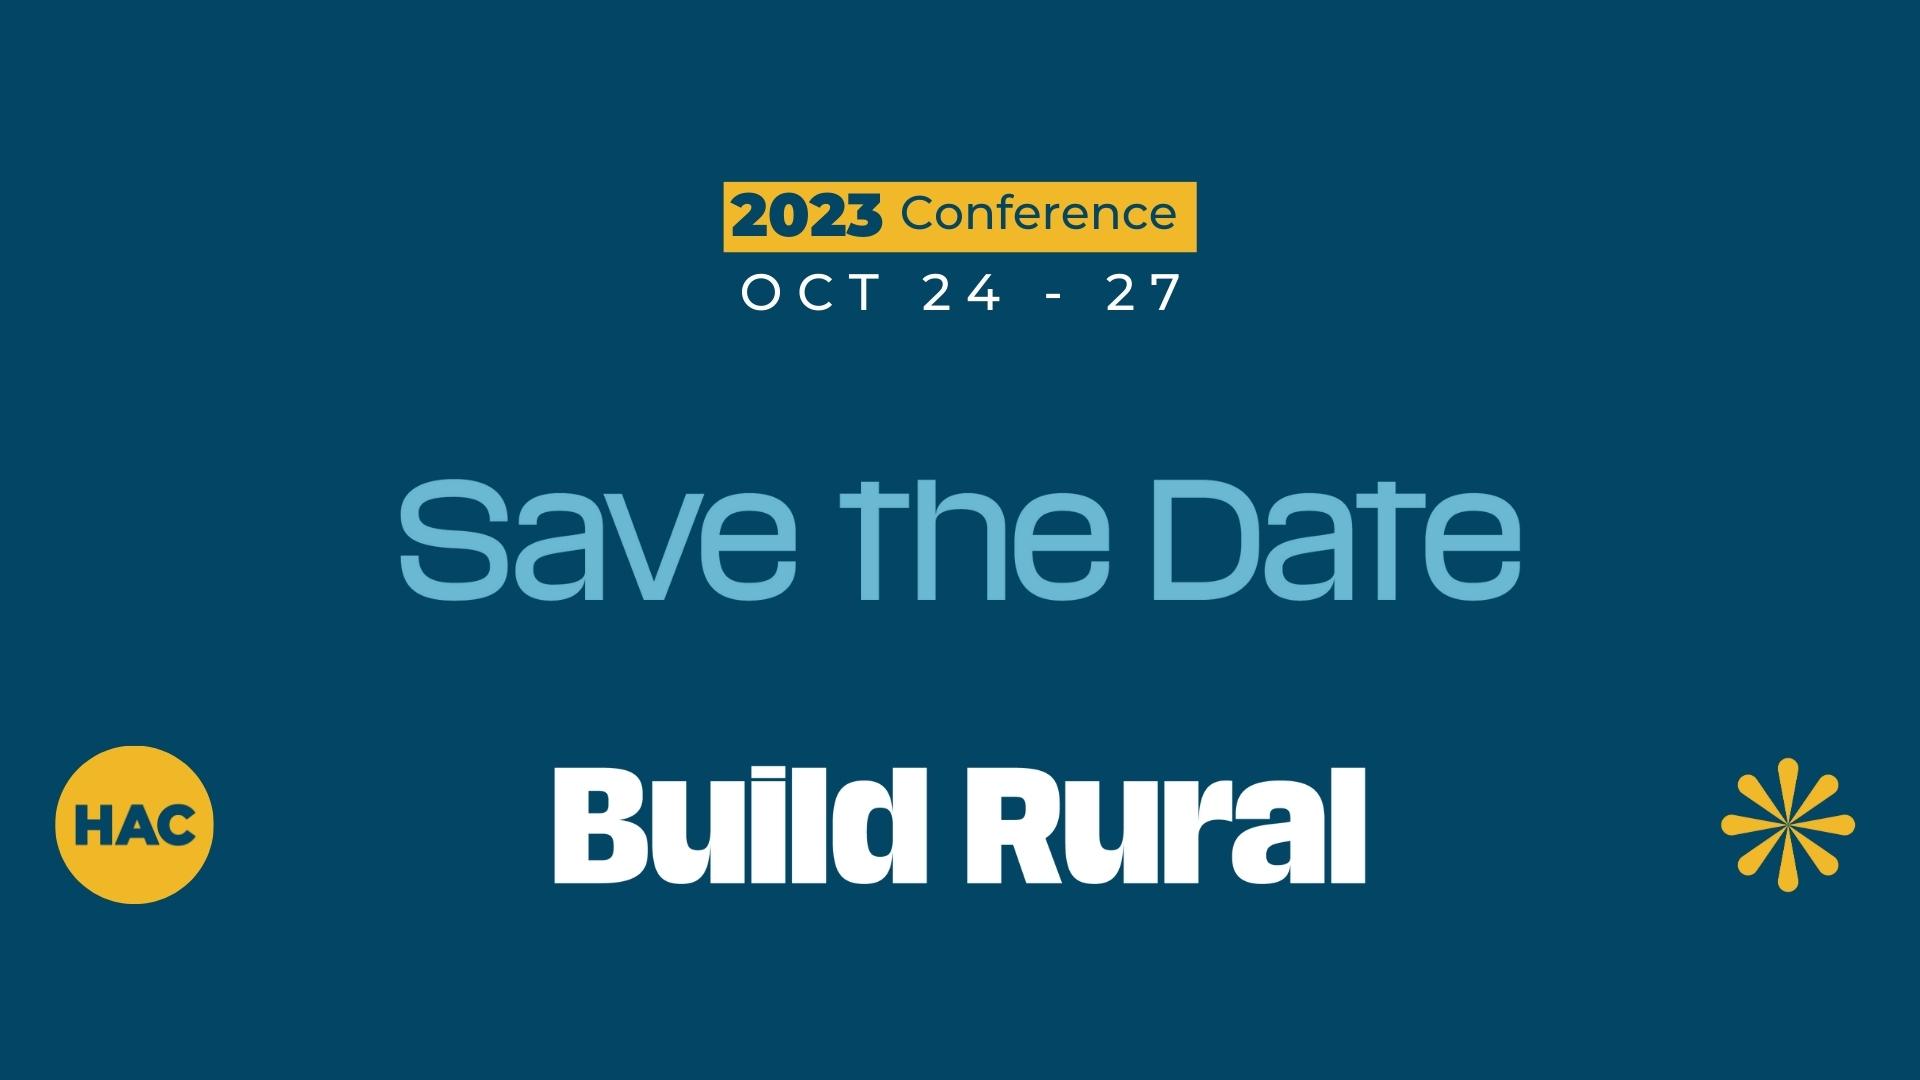 Save the Date for the 2023 National Rural Housing Conference - Oct. 24-27 - #BuildRural